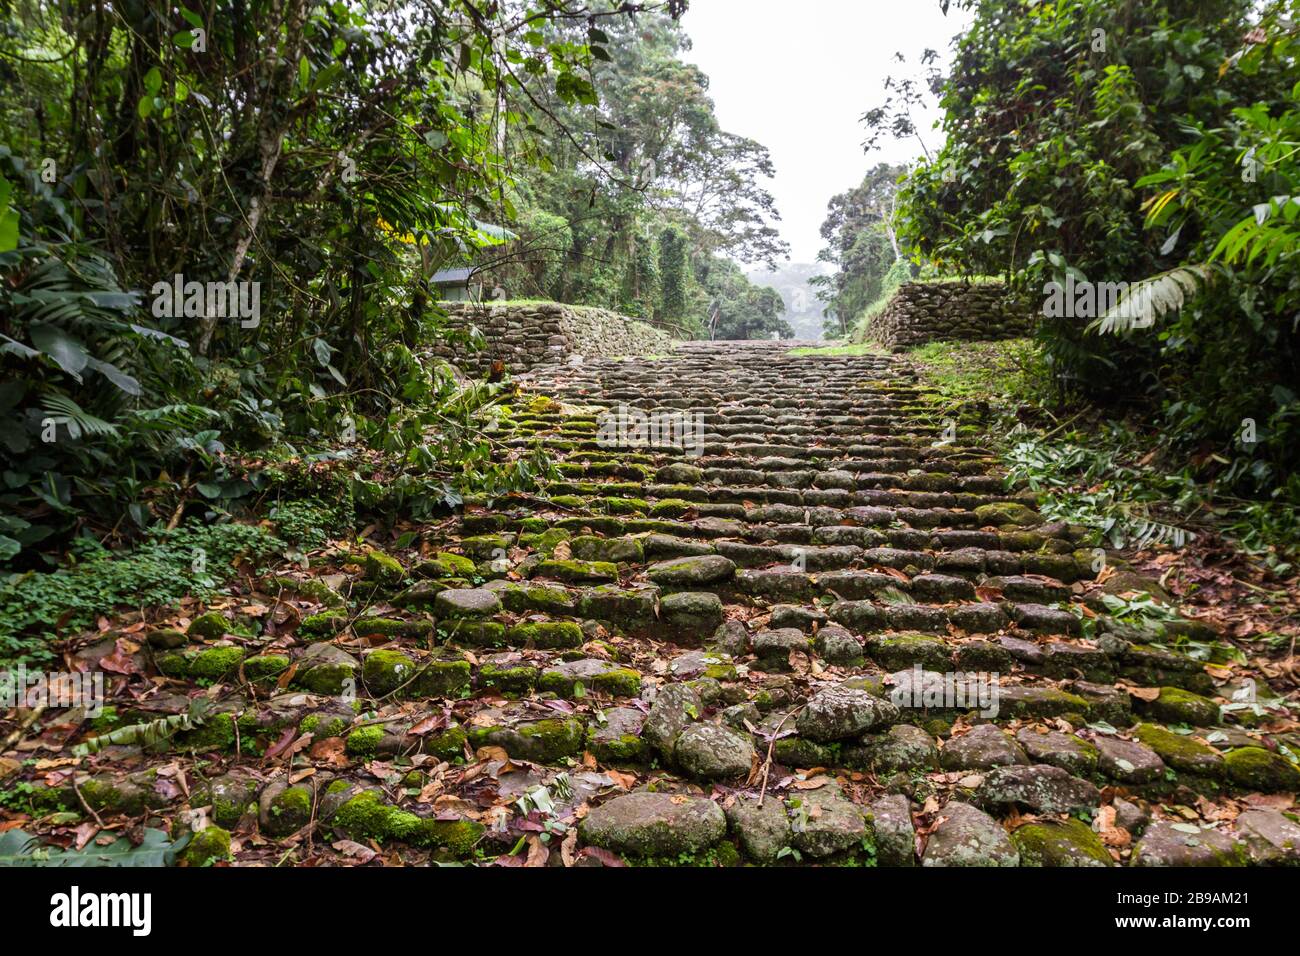 Ruins of an ancient civilization that thrived for over two thousand years in the mountains of Costa Rica, leaving behind stone work showing advanced k Stock Photo